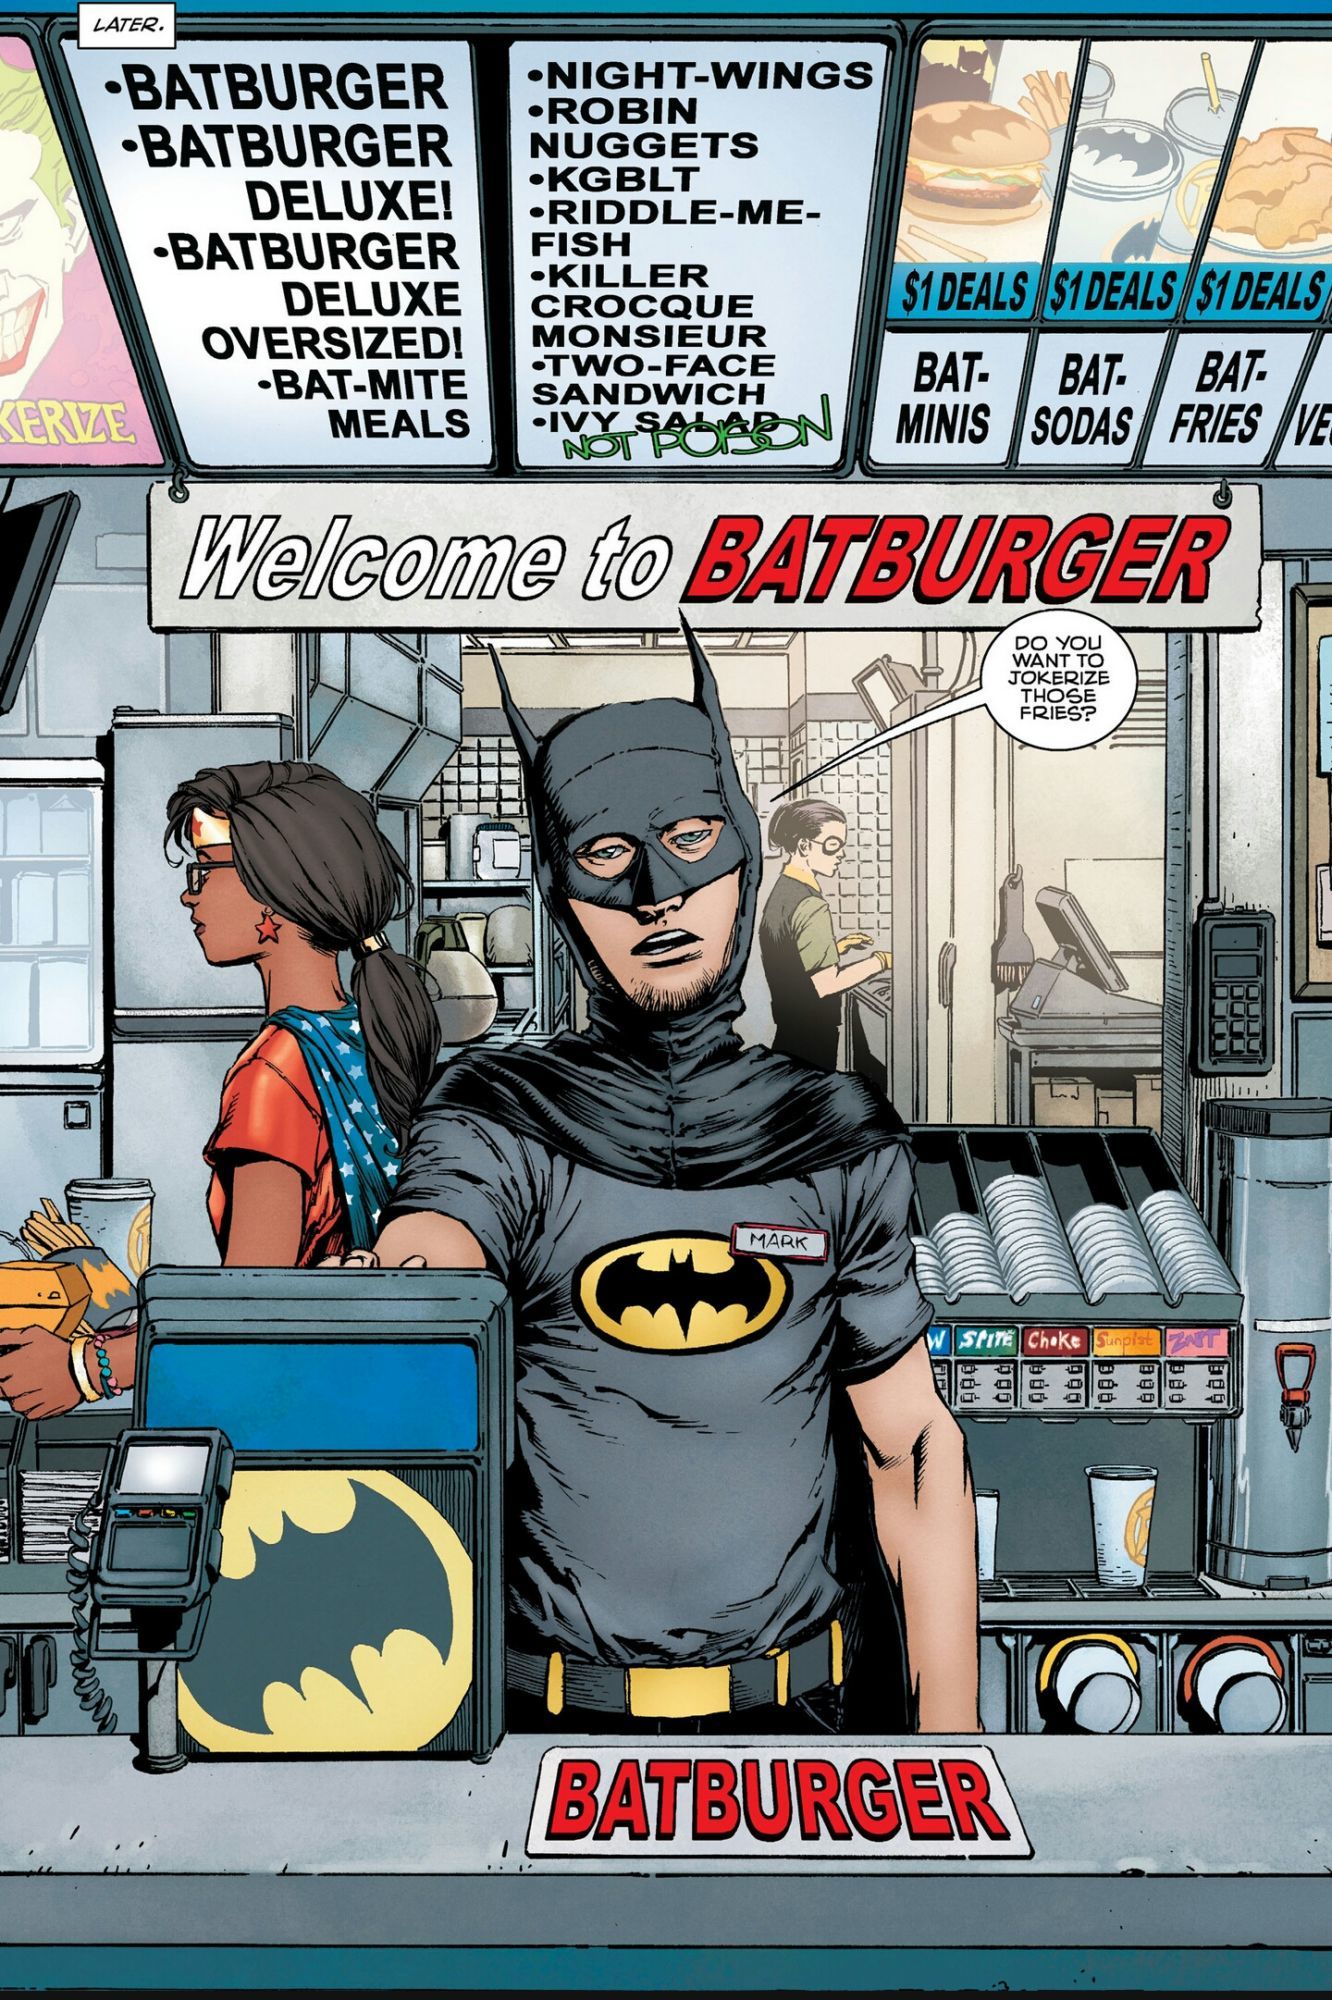 Britain Gets Batburgers for Real - Bleeding Cool News And Rumors